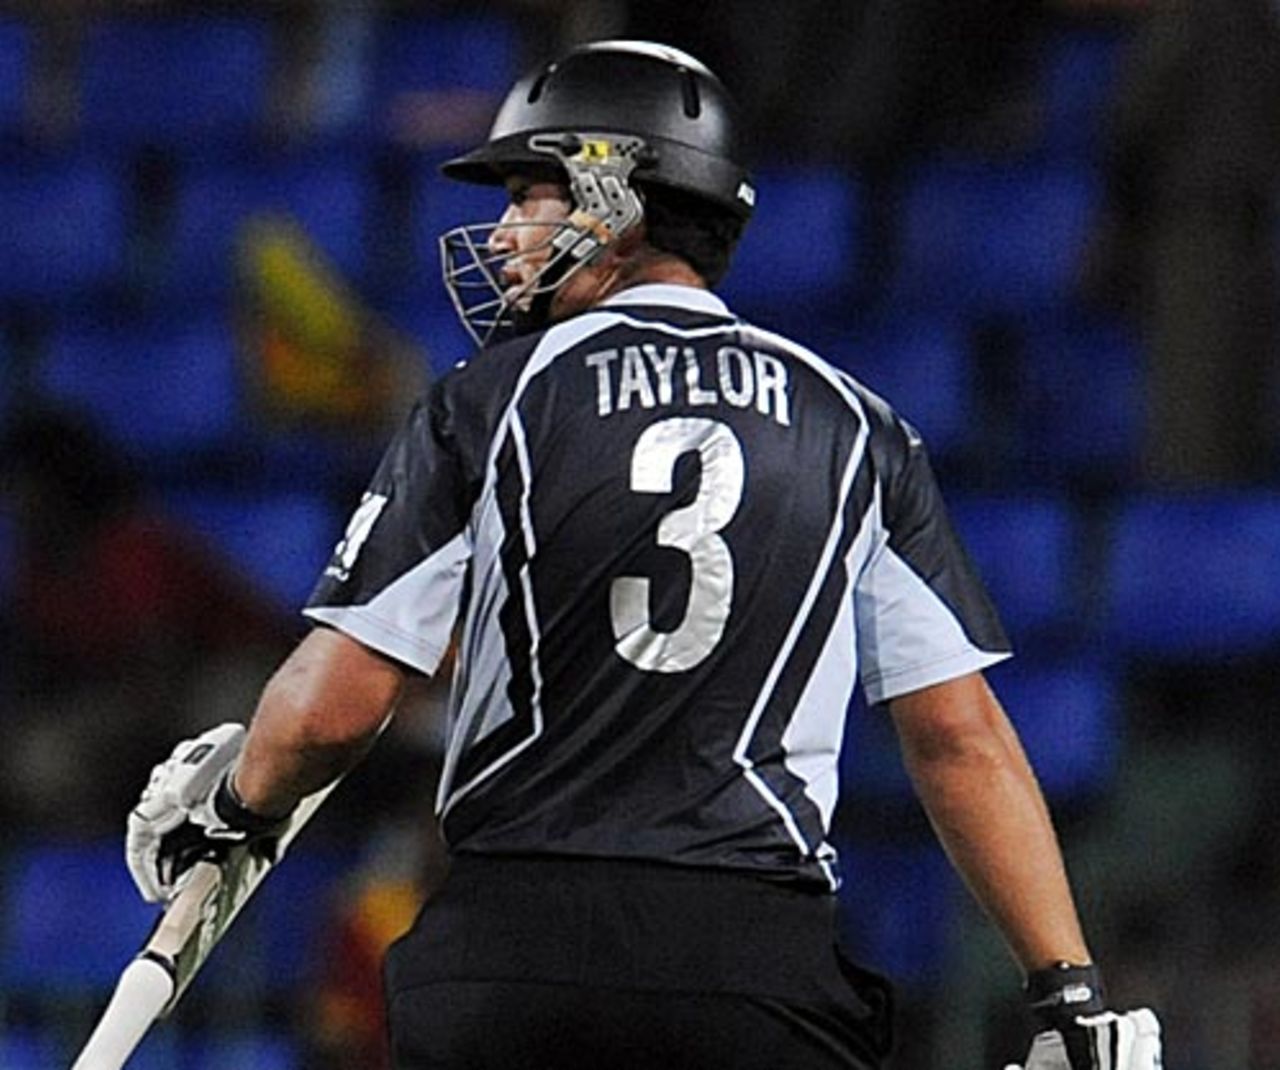 Ross Taylor turns back to look at the dreaded finger, Sri Lanka v New Zealand, 1st match, Compaq Cup, Colombo, September 8, 2009